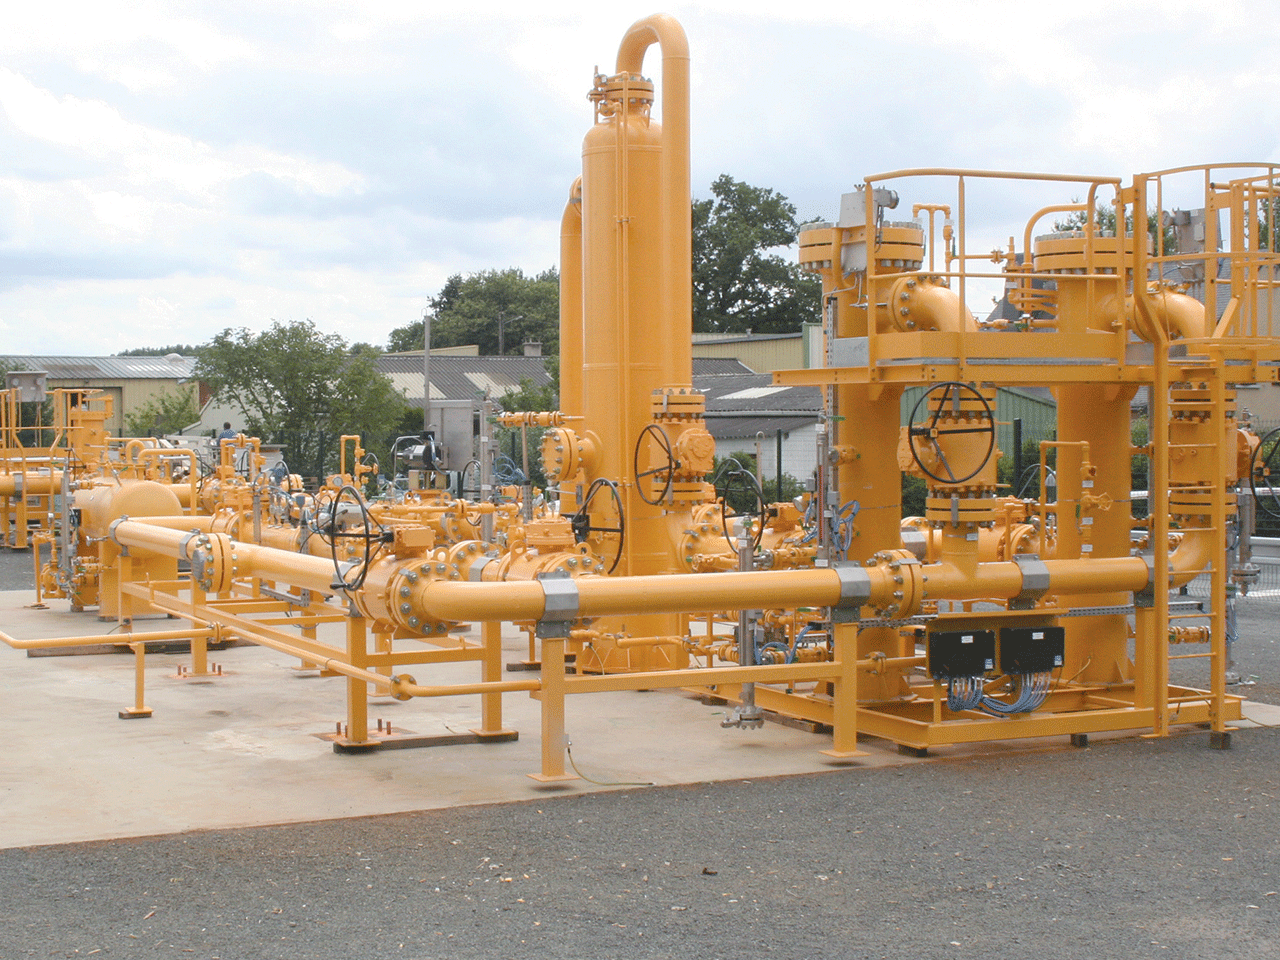 Adatech | INDIRECT WBH HEAT TRACING FOR SUMED Natural Gas Pressure Reducing & Metering Station